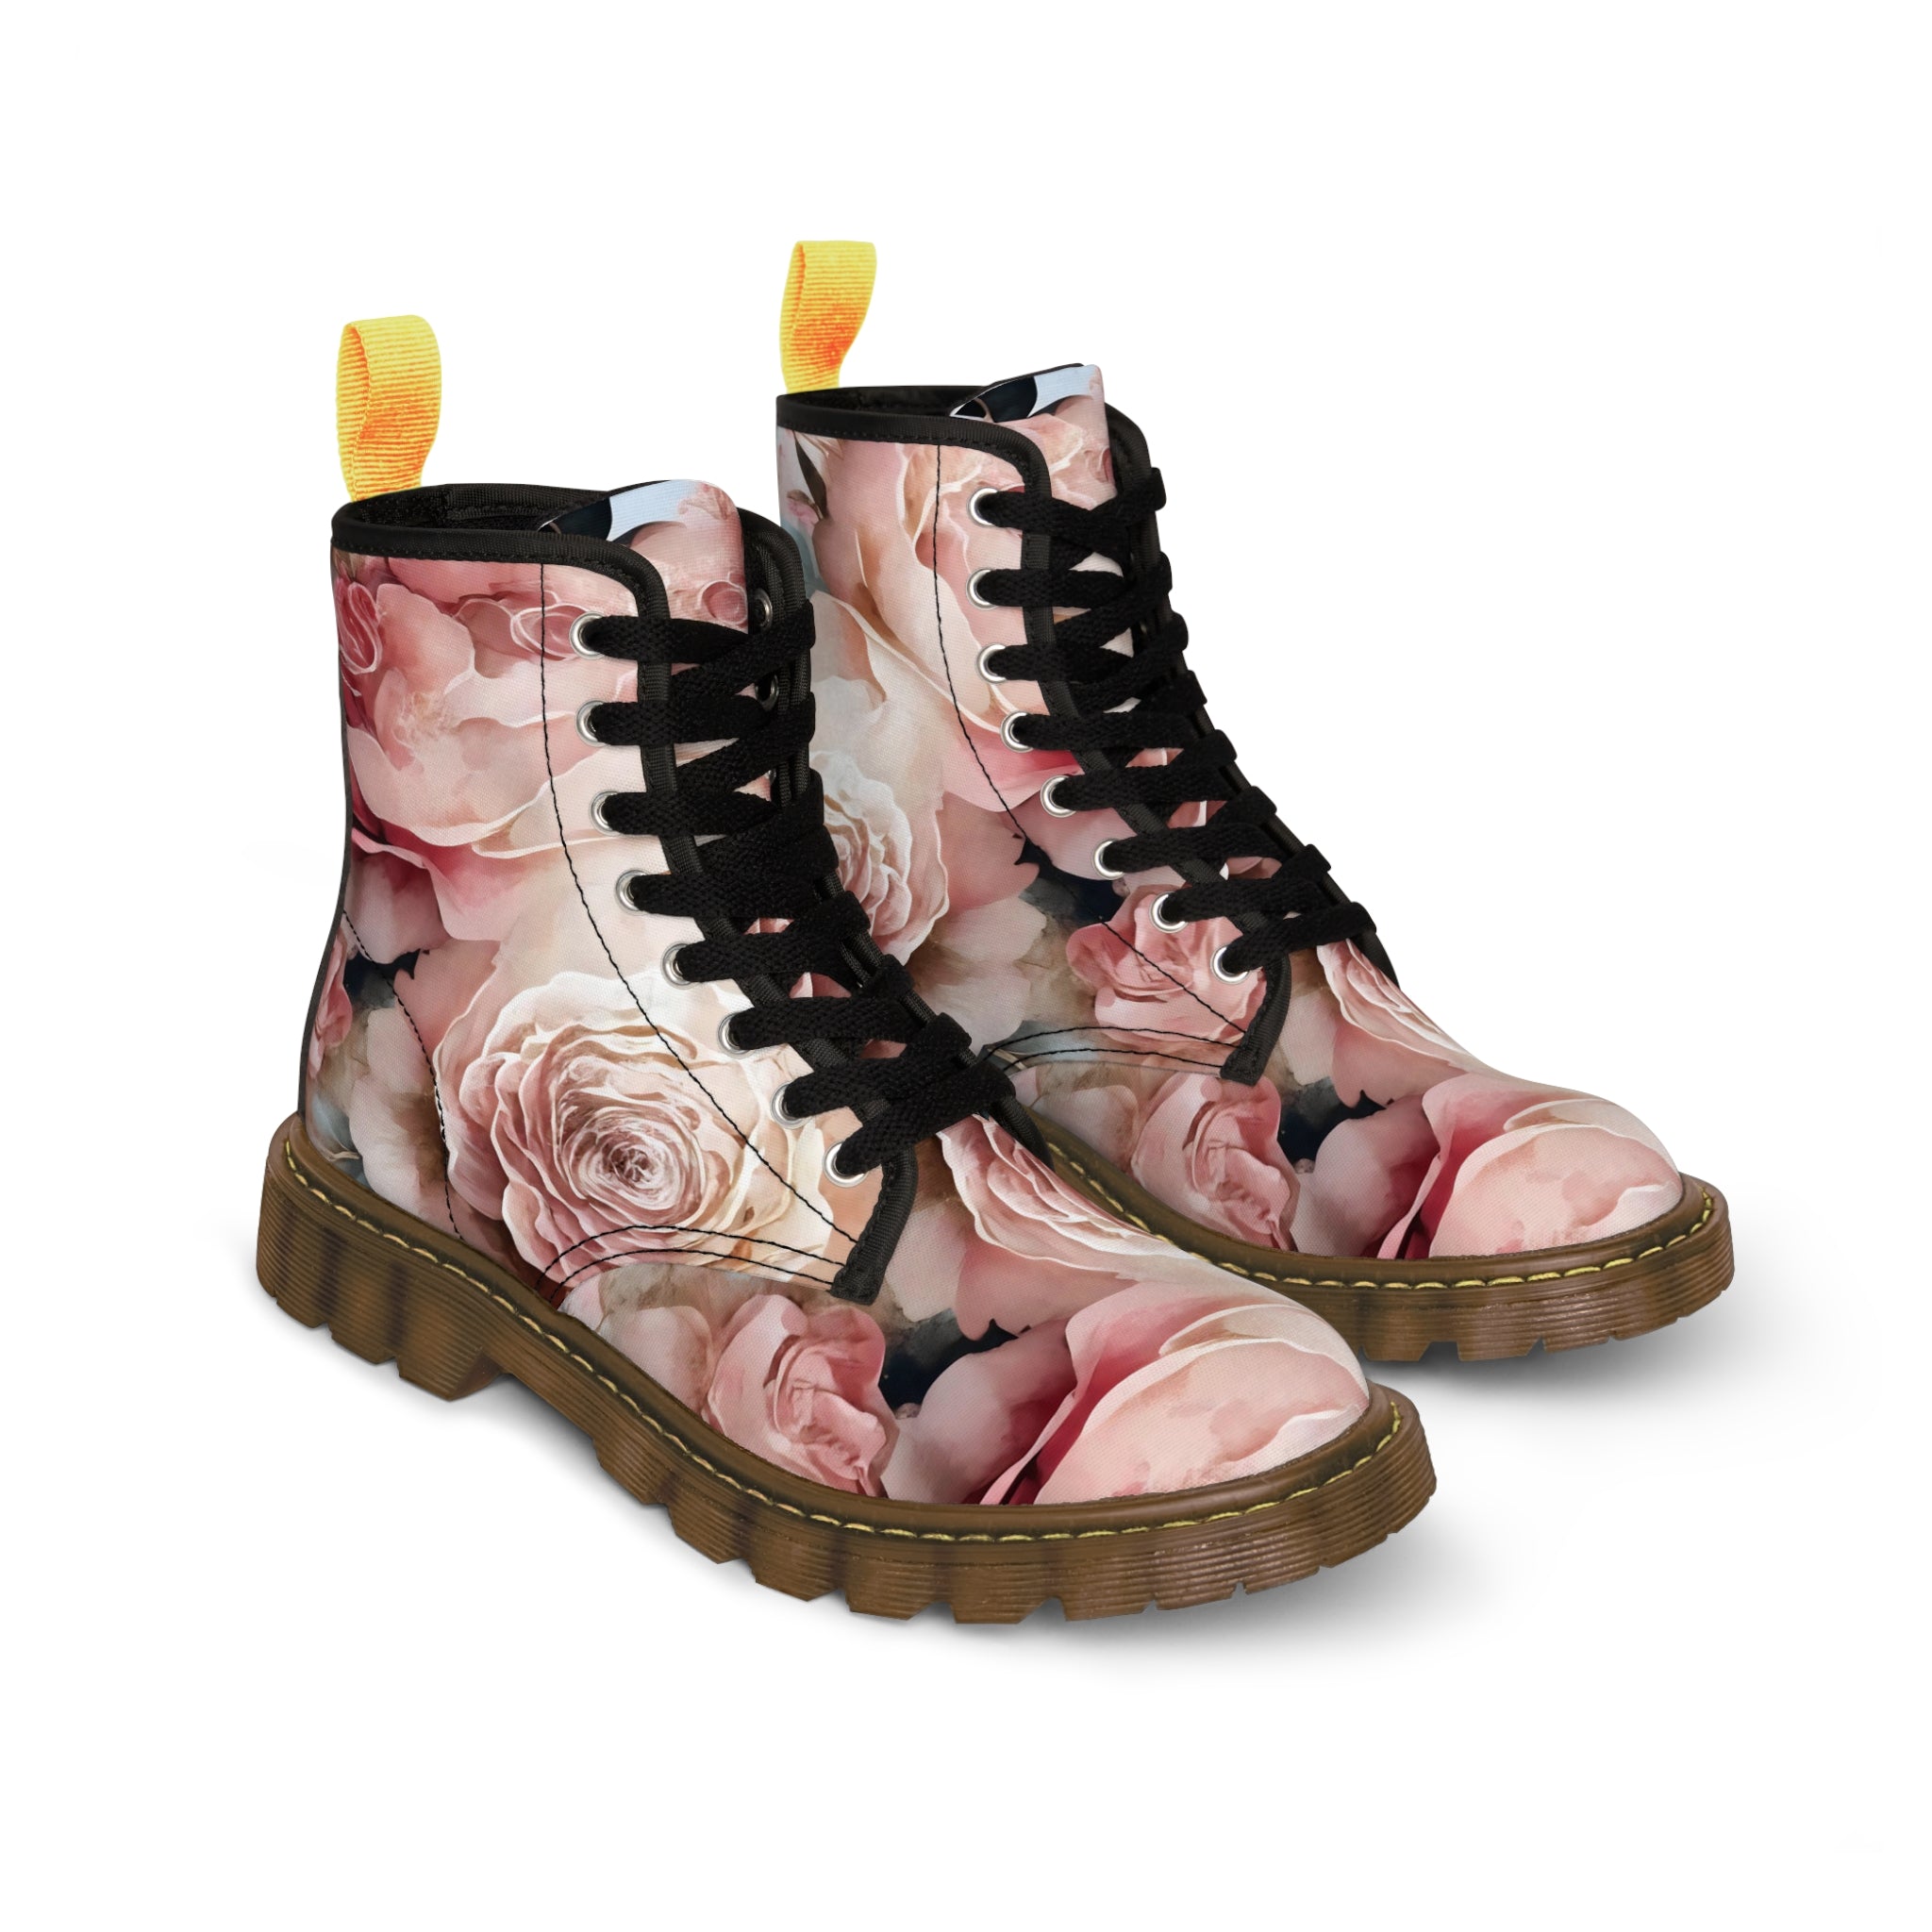 The Vintage Creamy Peach and Rose Women's Bloom Canvas Boots, Military Style Lace Up Boots, Women's Canvas Boots